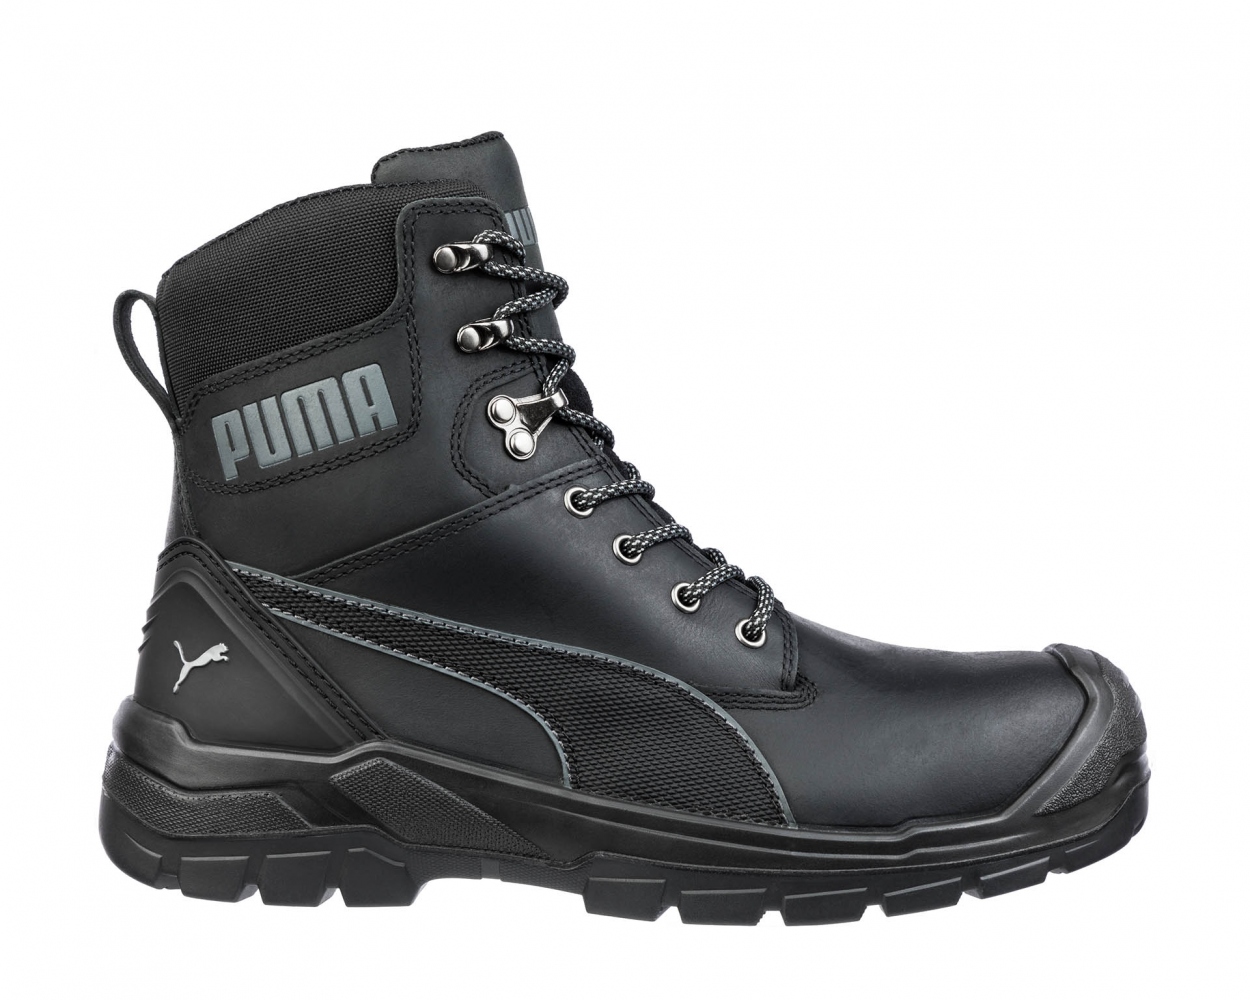 puma work safety shoes